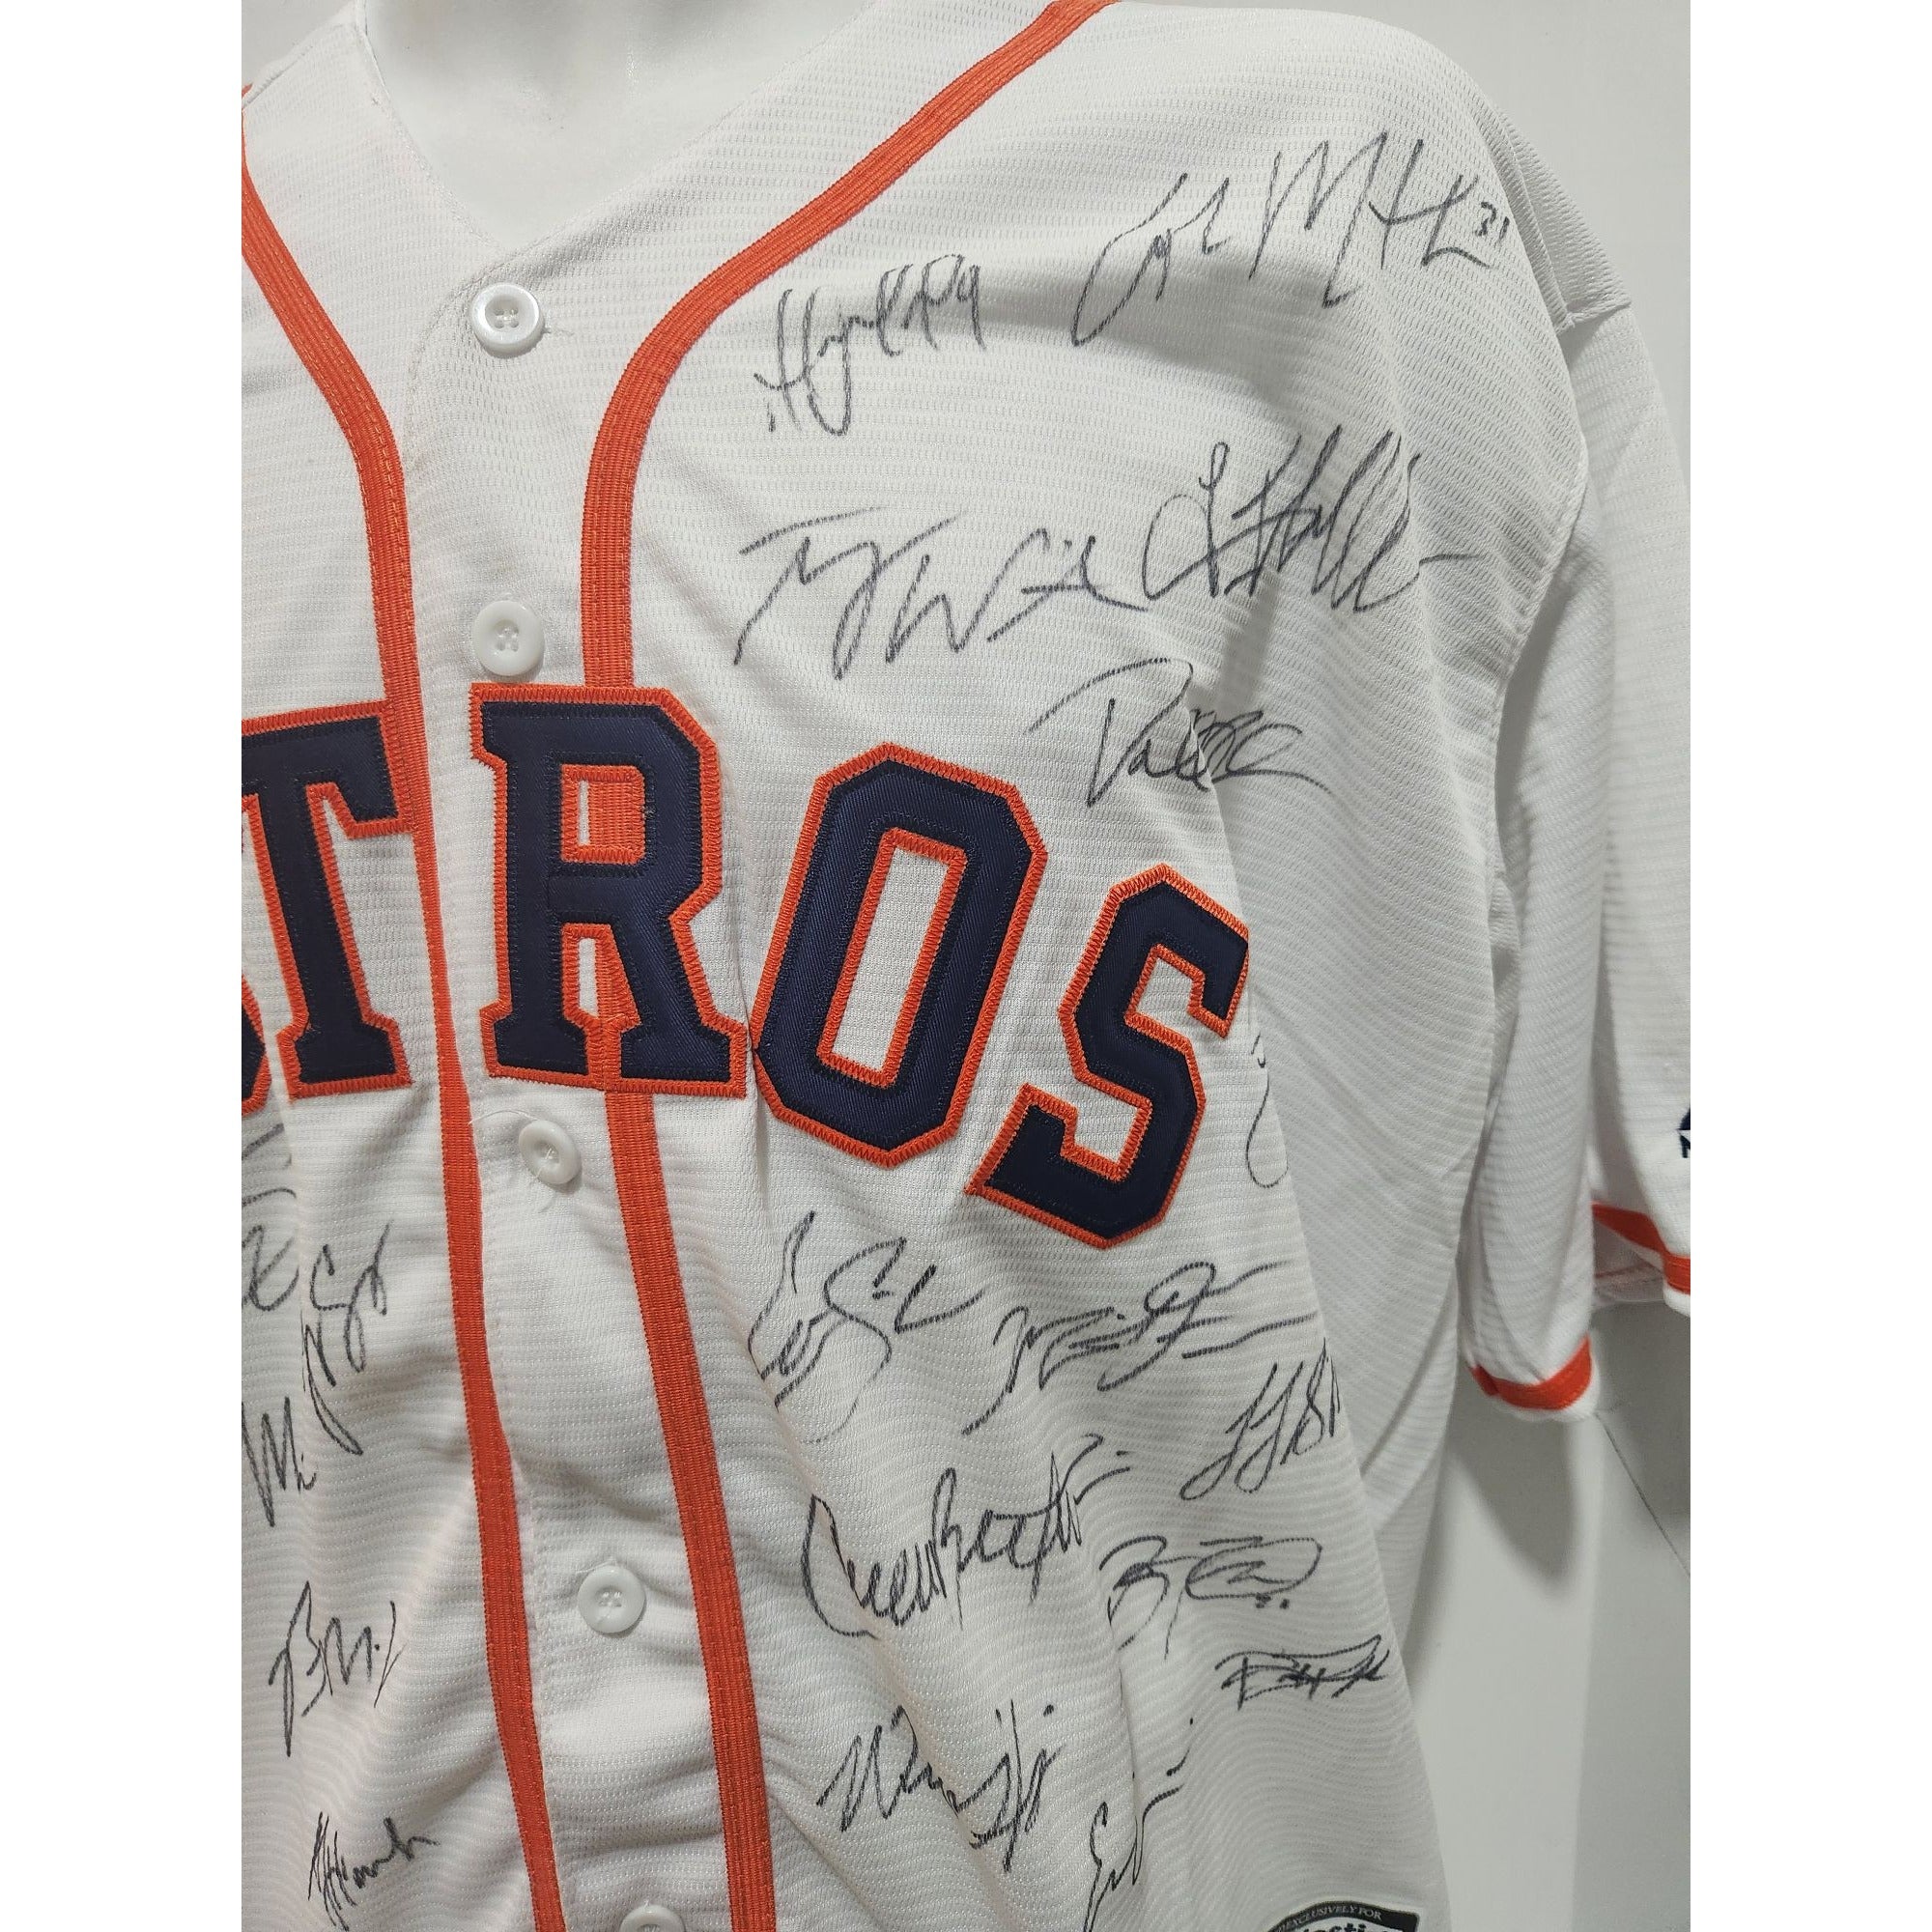 Sold at Auction: Justin Verlander Houston Astros signed autographed  baseball jersey Certified COA